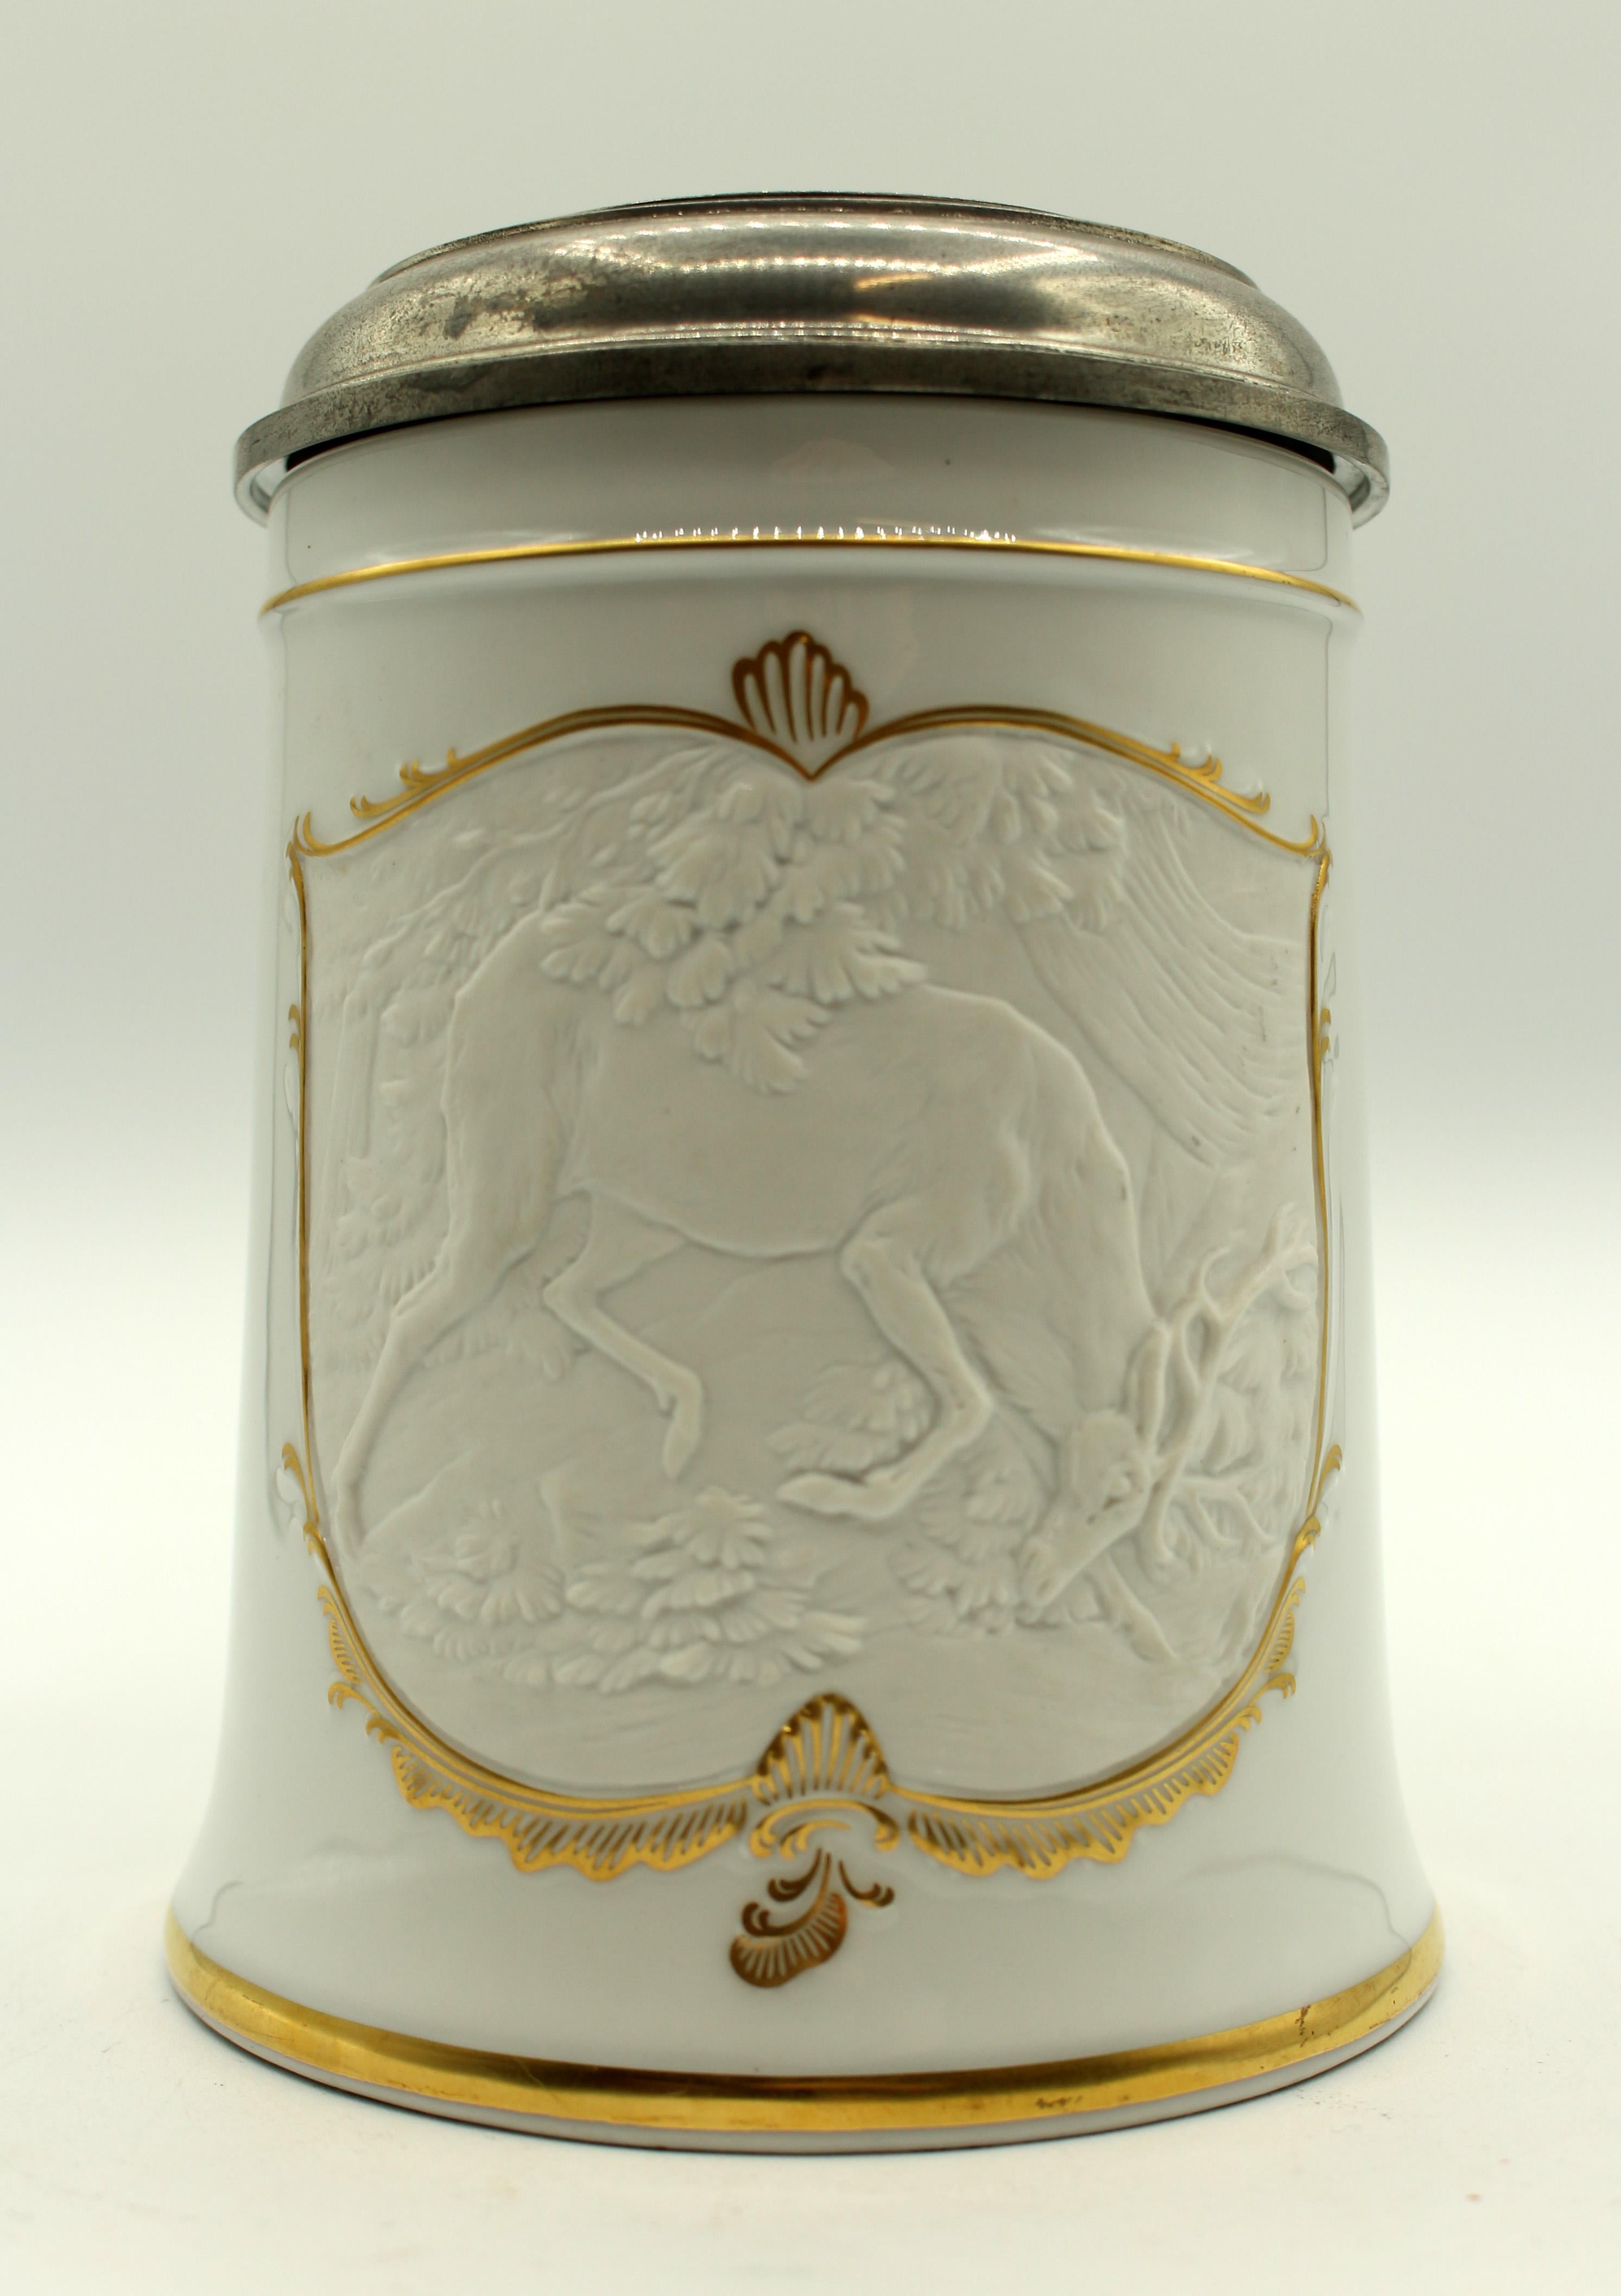 1949-1990 Kaiser porcelain stein. W. Germany mark. Stag motif pewter top after the work of Johann Ridinger, a bisque bas relief of charging stag in rococo shield. Pewter flip top repeats stag motif. Measures:  4 3 / 8